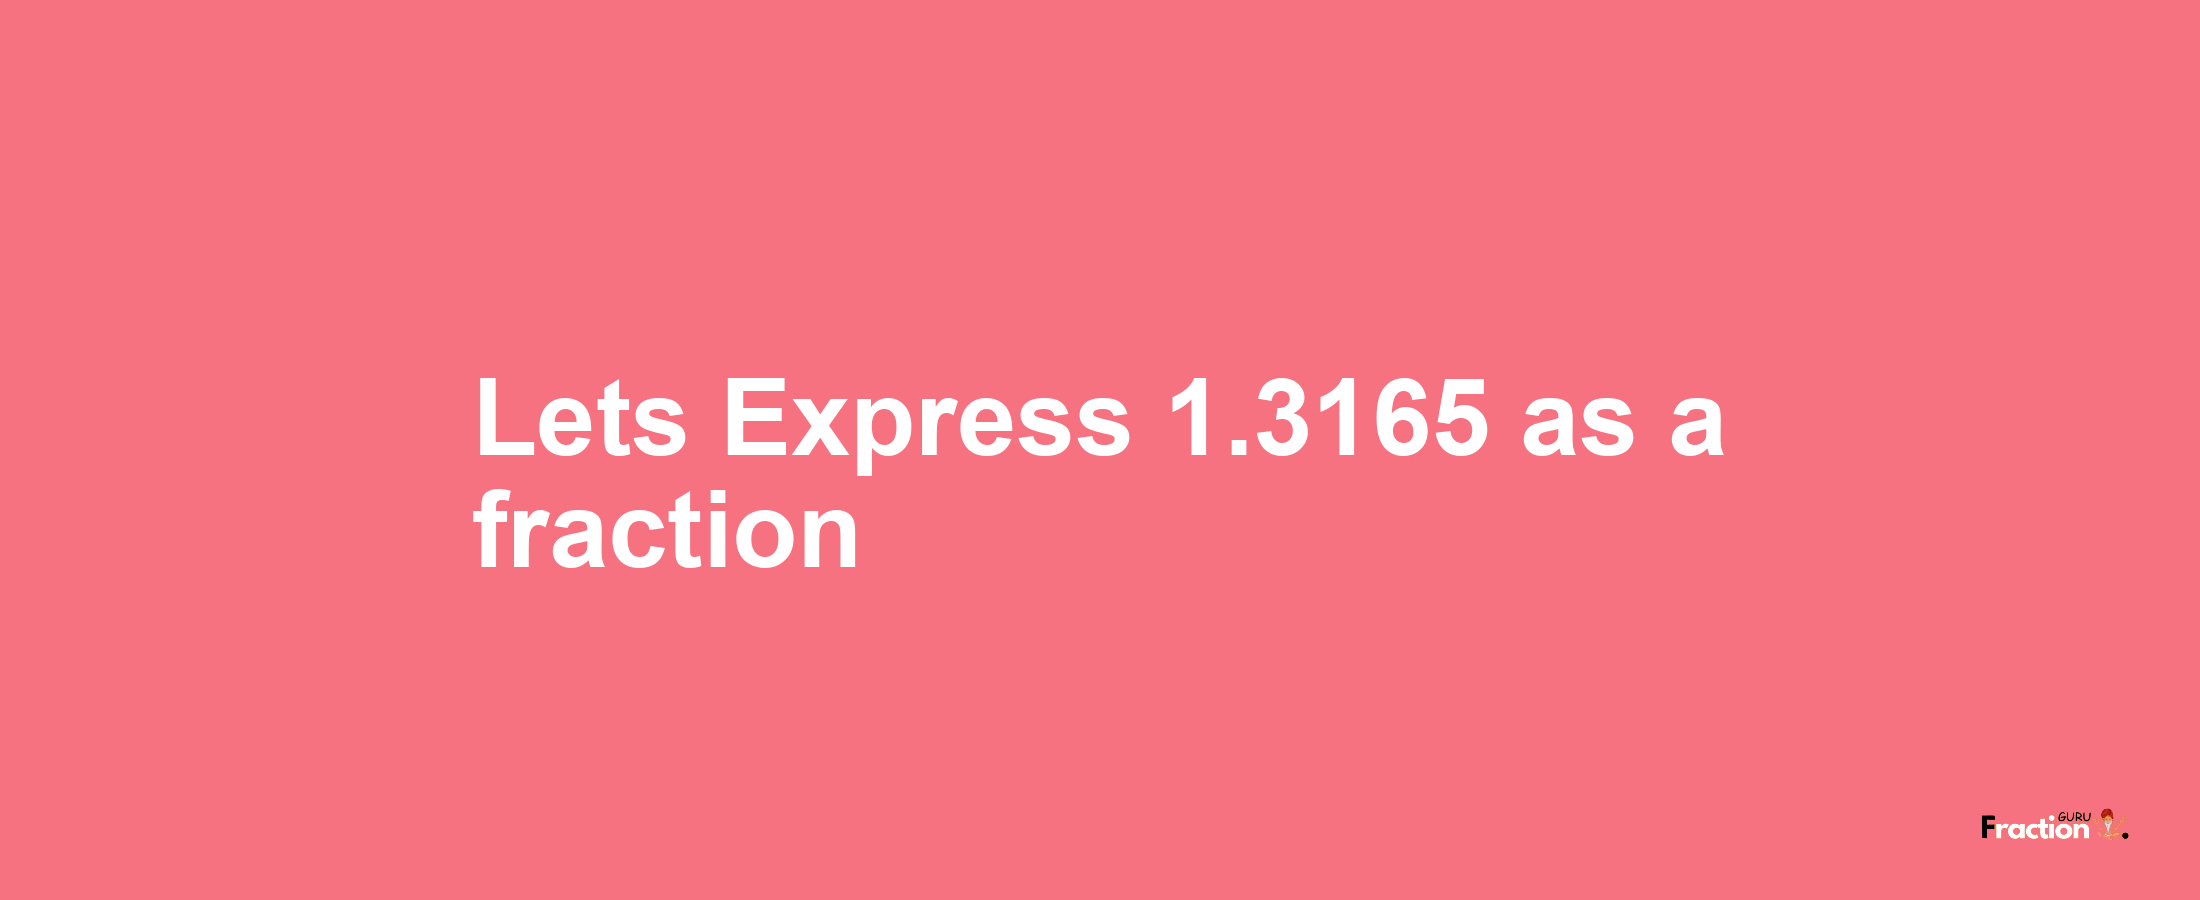 Lets Express 1.3165 as afraction